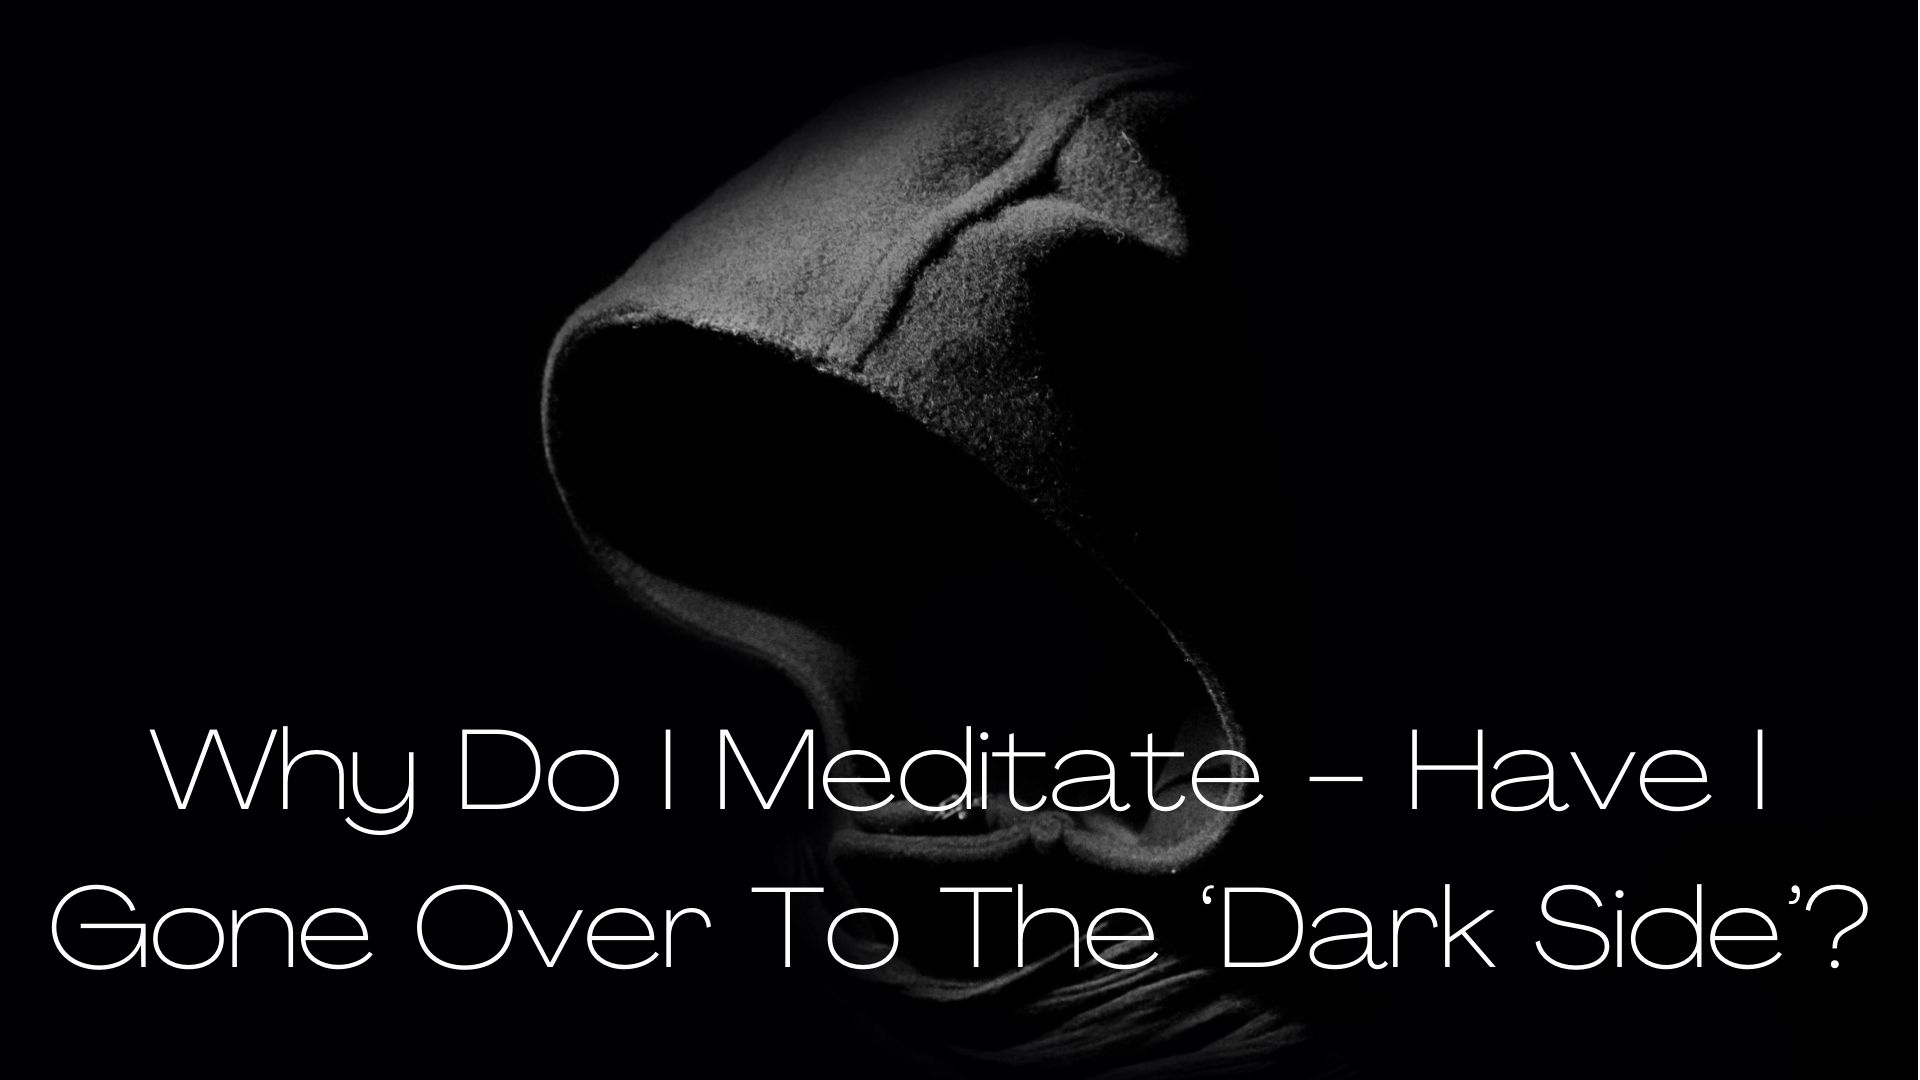 Why Do I Meditate - Have I Gone Over To The ‘Dark Side’